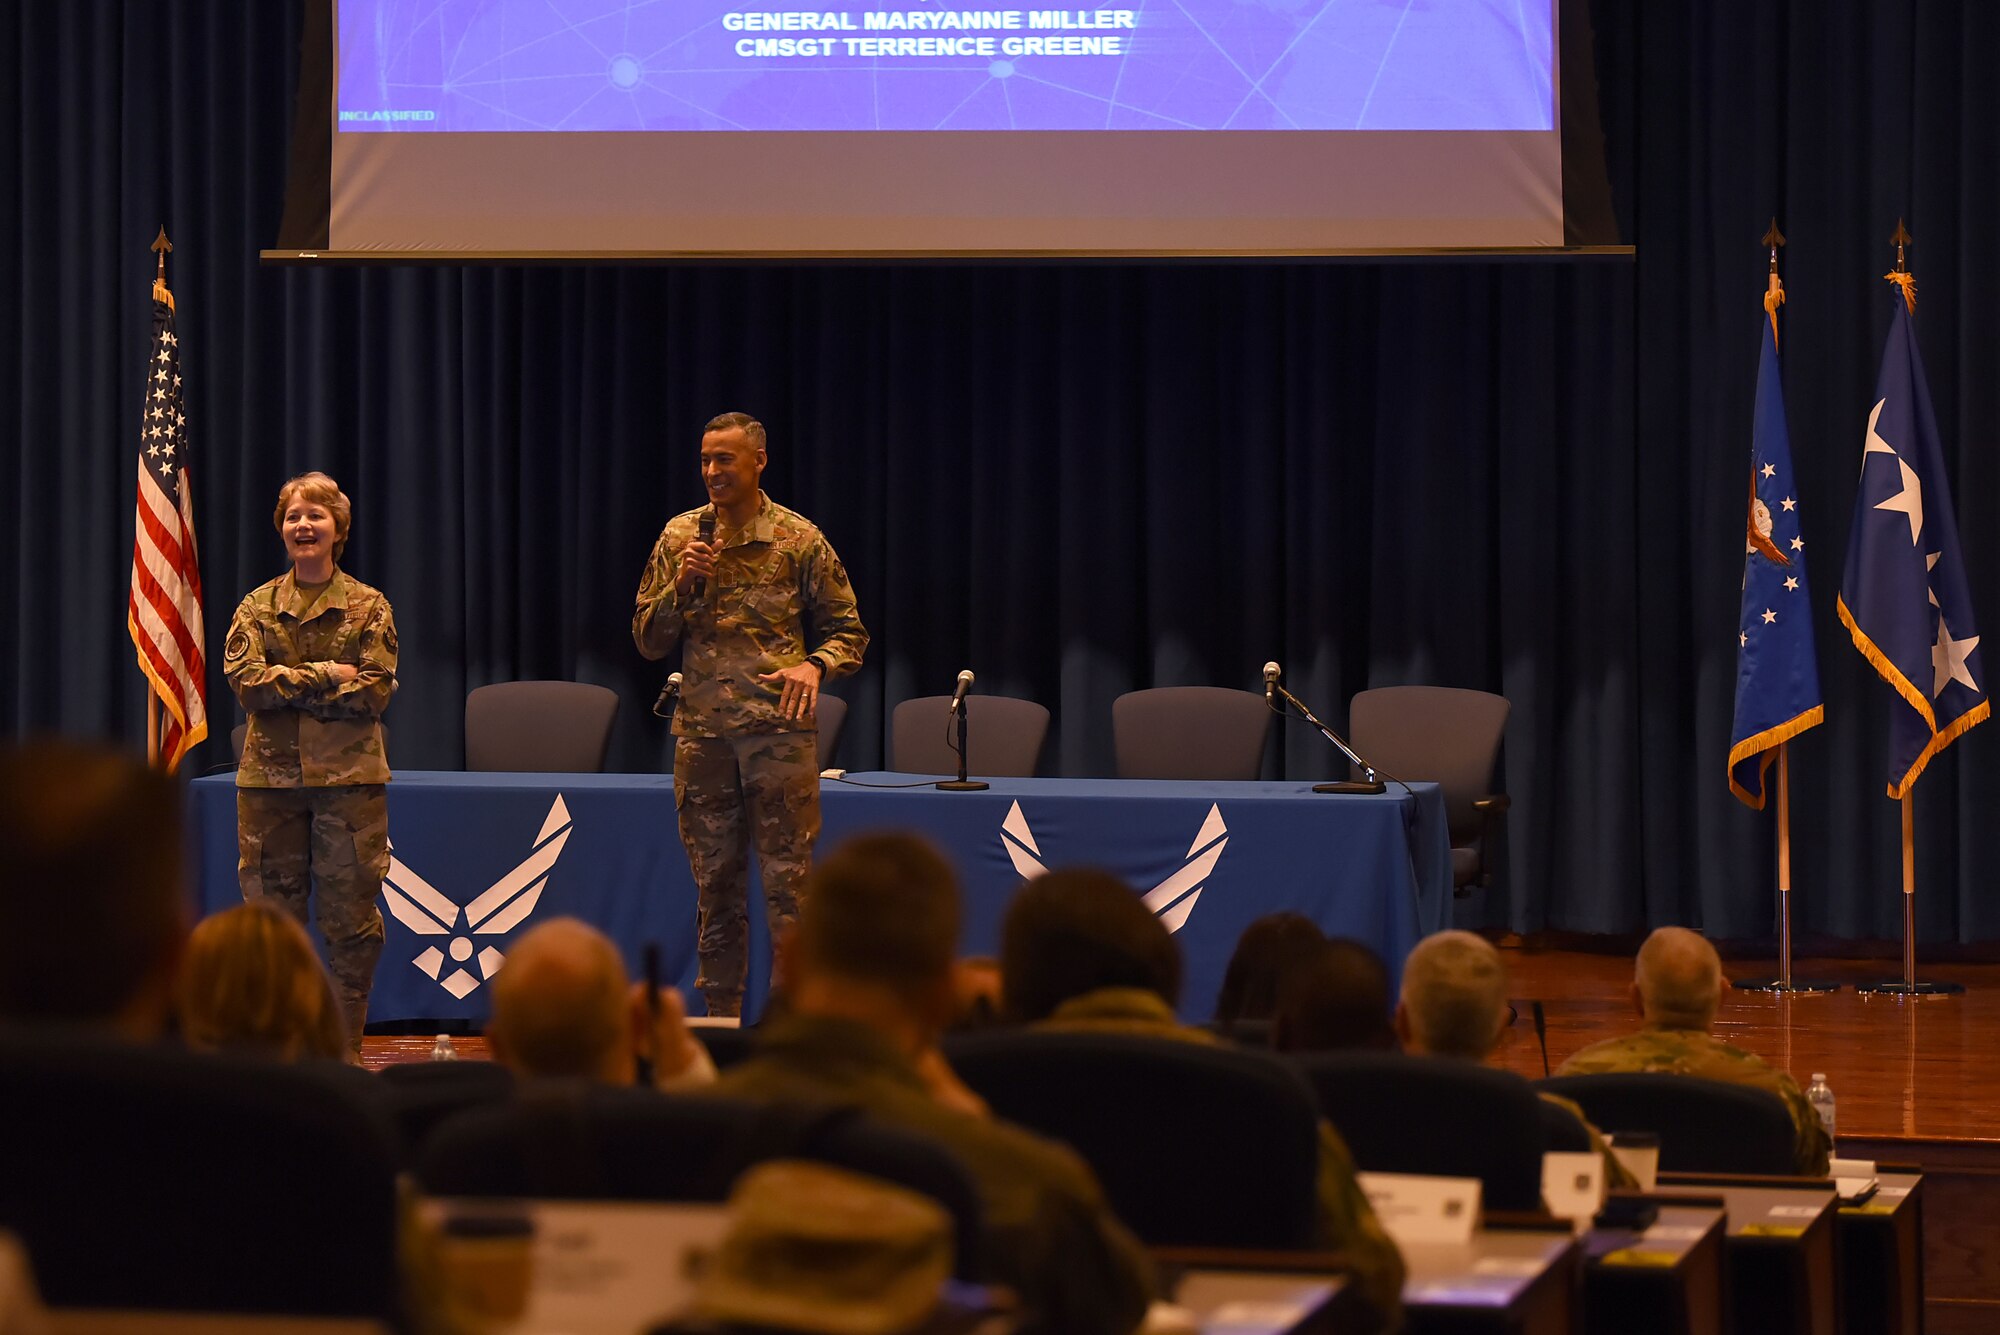 U.S. Air Force General Maryanne Miller, commander of Air Mobility Command (AMC), welcomes 2019 Fall Phoenix Rally attendees Oct. 8, 2019, in the U.S. Air Force Expeditionary Center at Joint Base McGuire-Dix-Lakehurst, New Jersey.